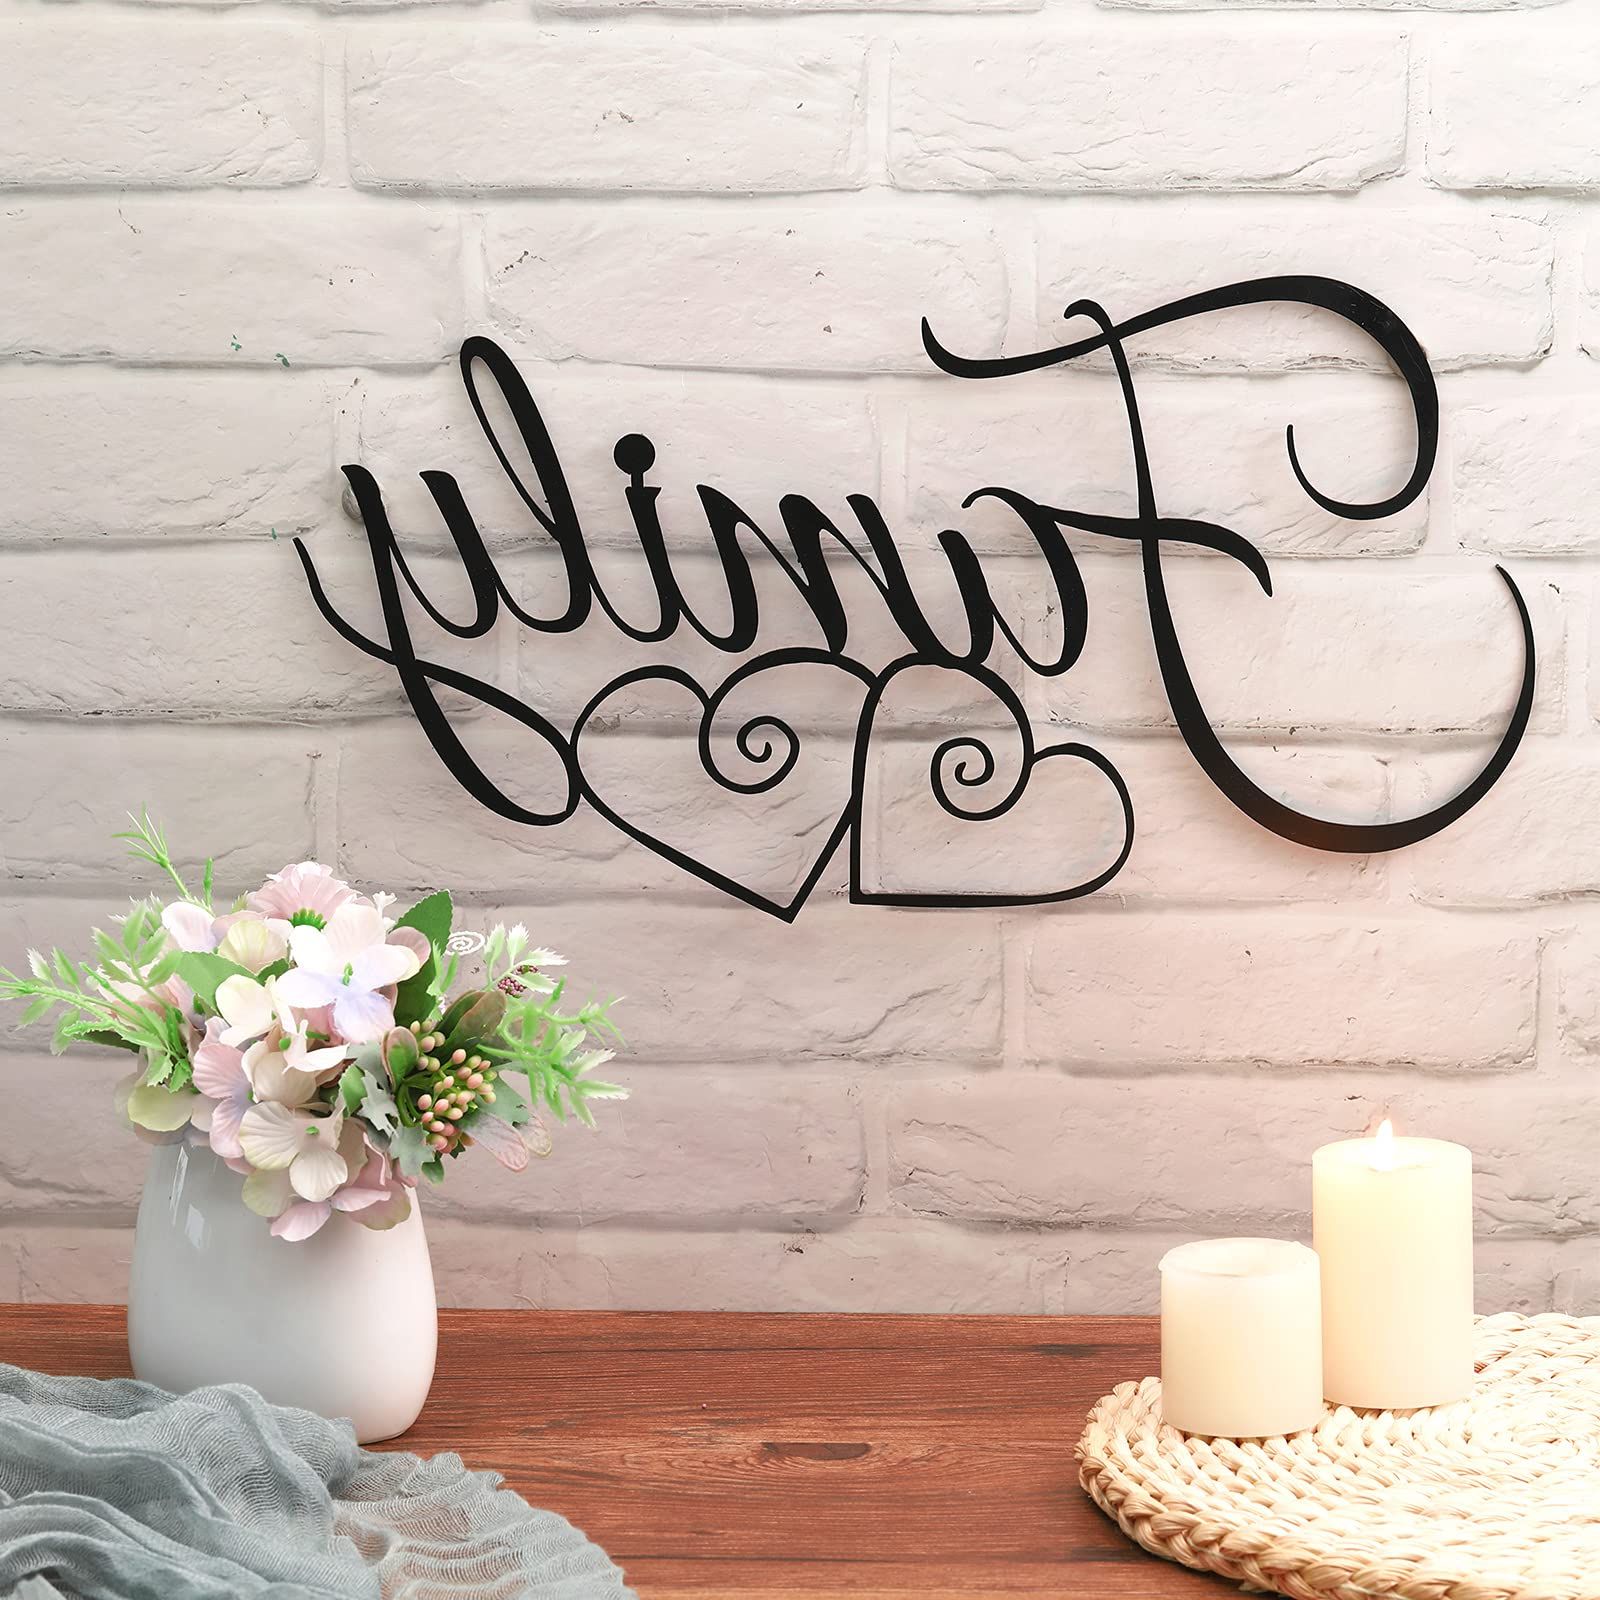 Popular Family Wall Sign Metal In Amazon: Family Wall Decor Sign Art Wall Hanging Decoration For Home  Dining Room Kitchen Door Decorations Wall Decor (black,metal): Home &  Kitchen (View 10 of 15)